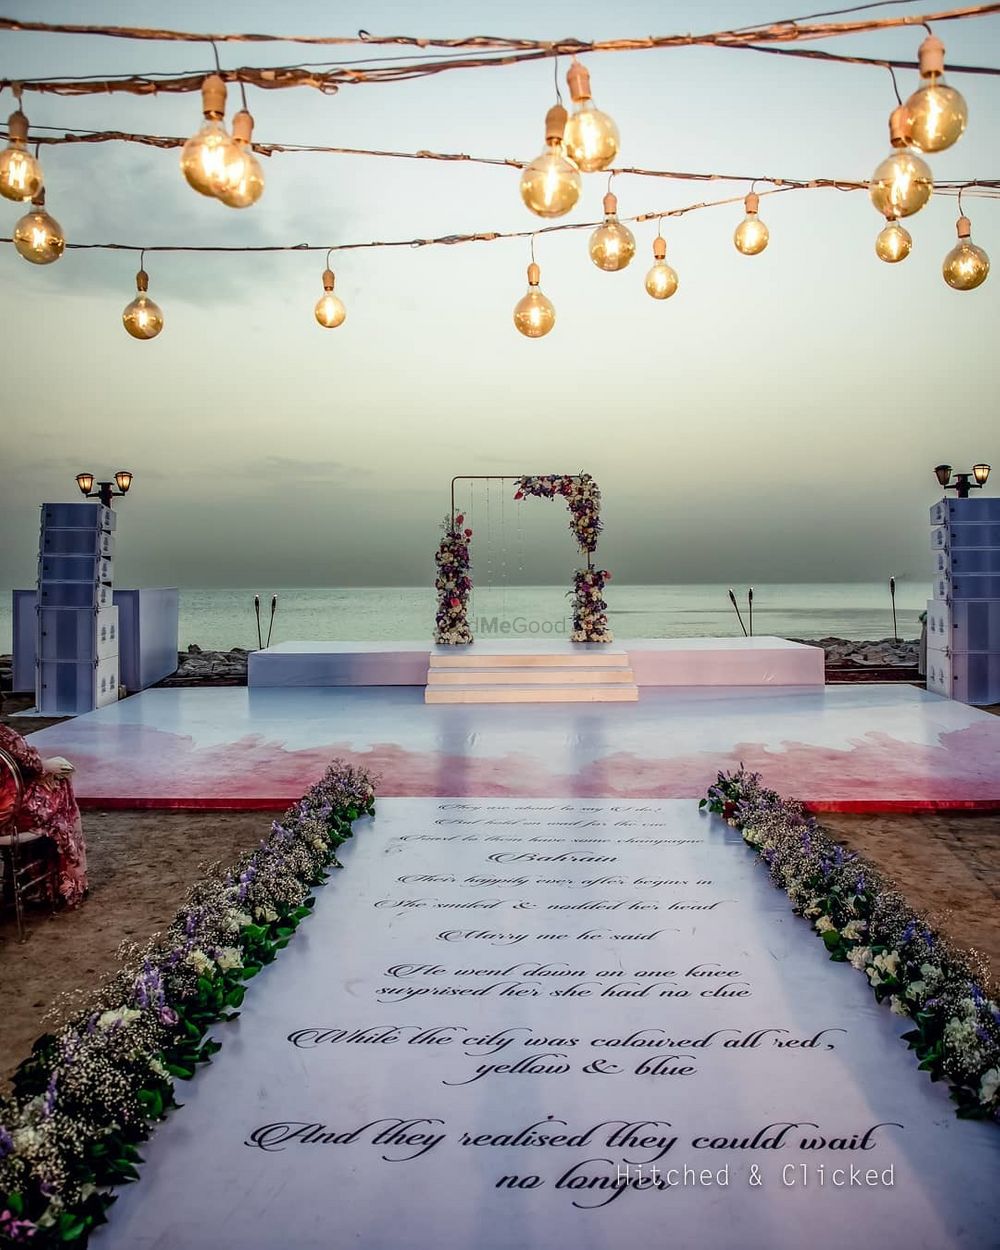 Photo of personalised mandap decor with a printed aisle and stage setup